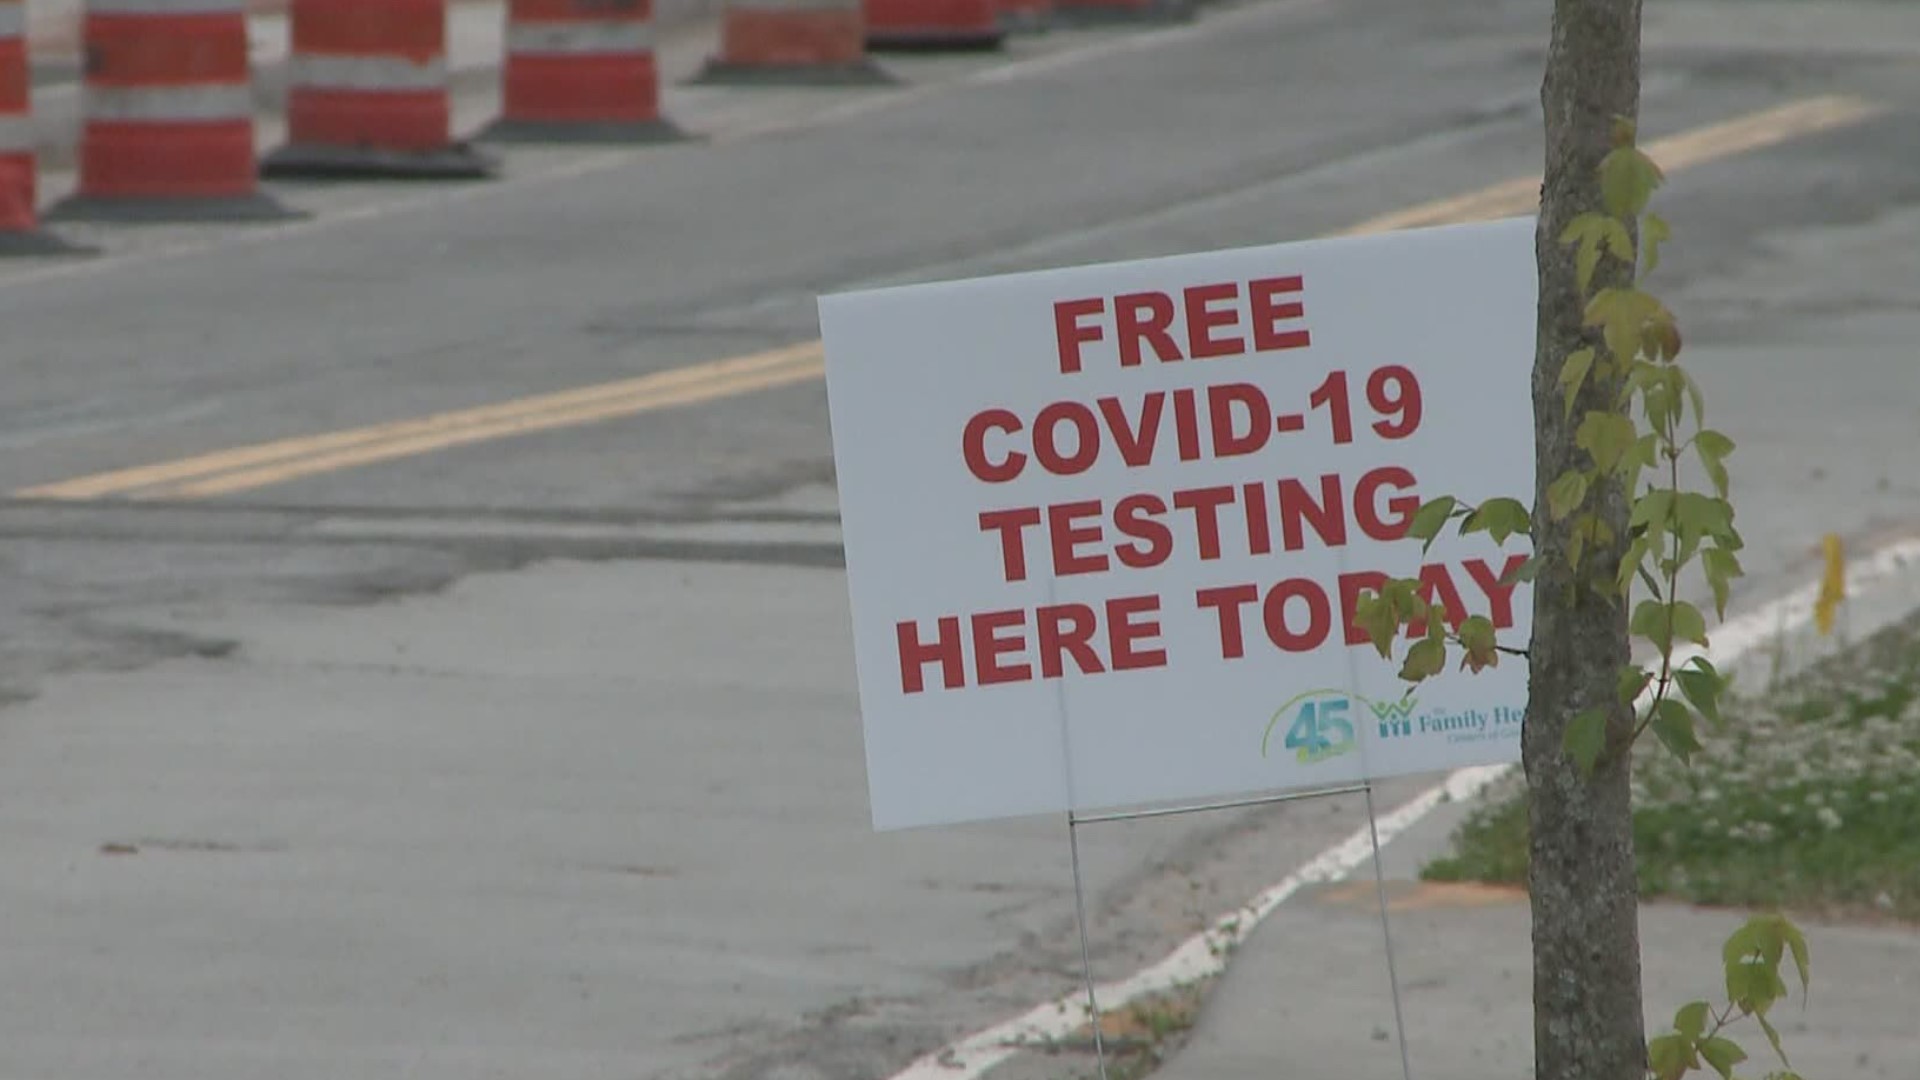 There's been an overwhelming demand for tests this week, officials said.